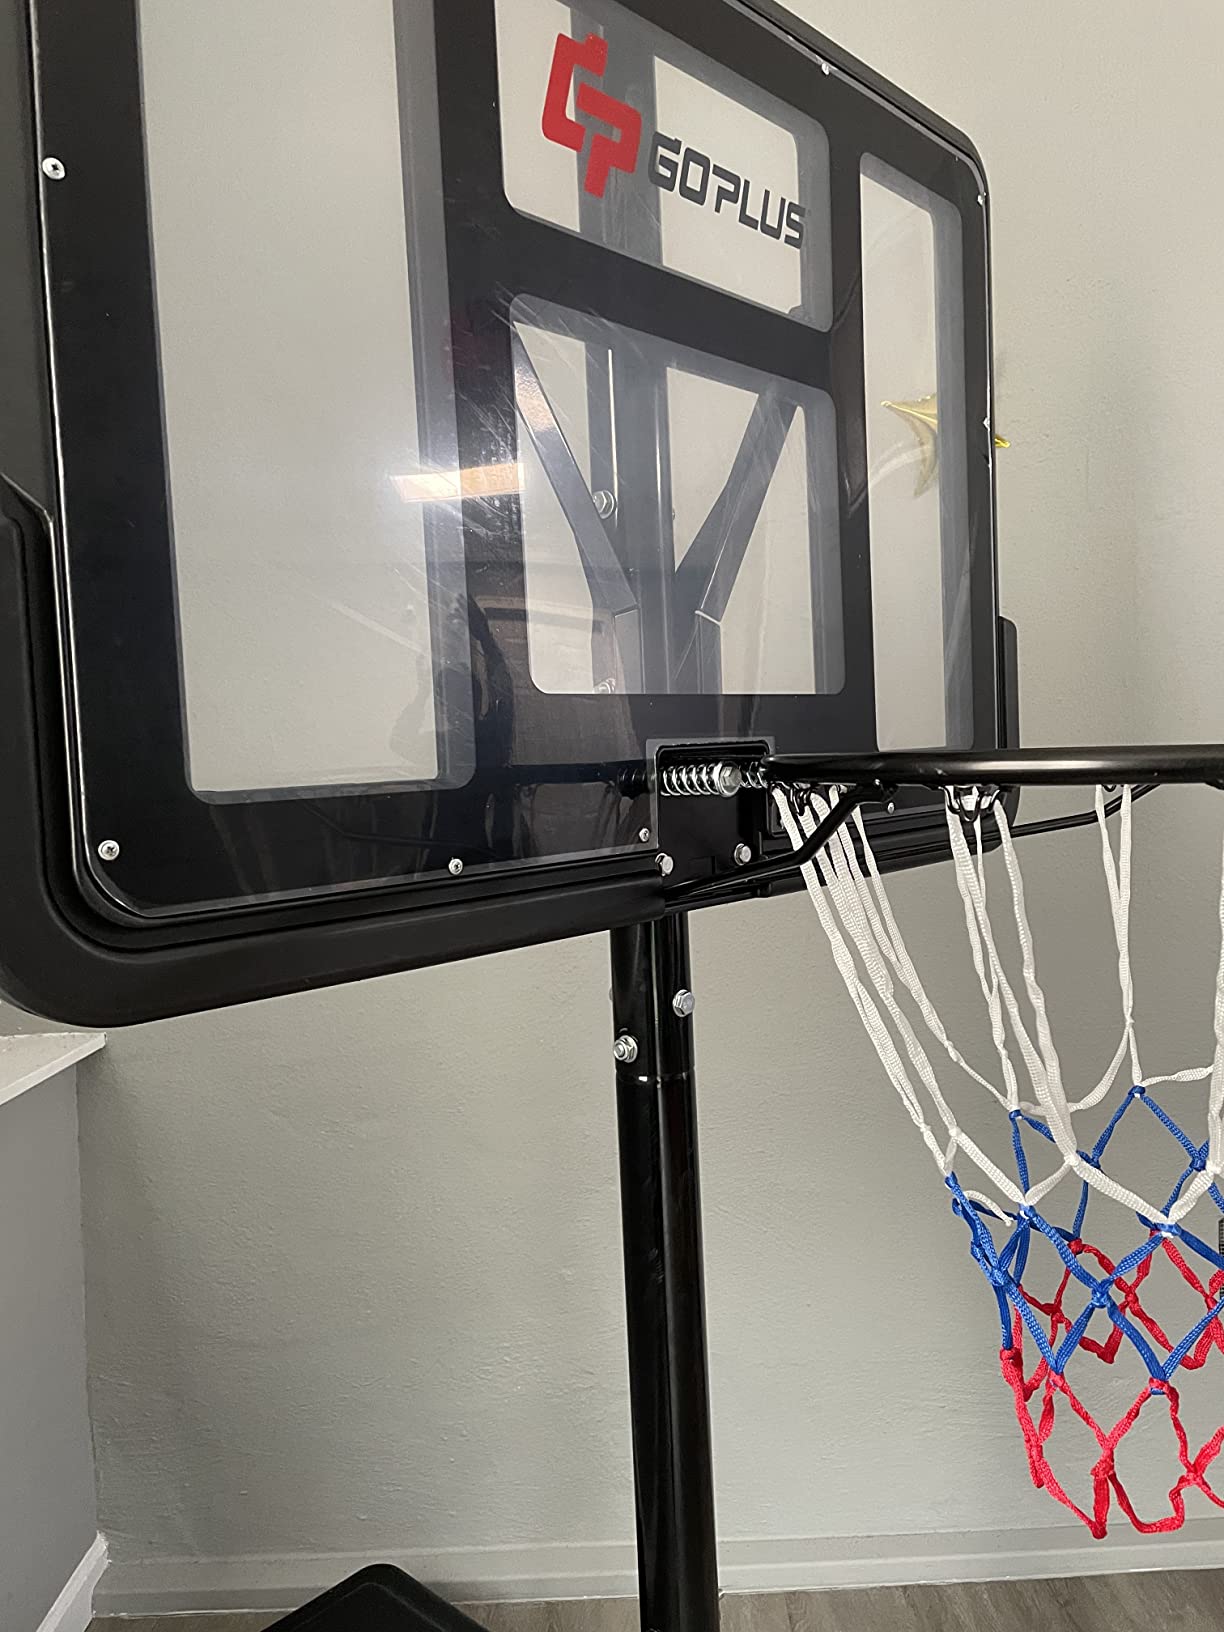 Costway 43.5 in. x 35 in. Portable Basketball Hoop Stand